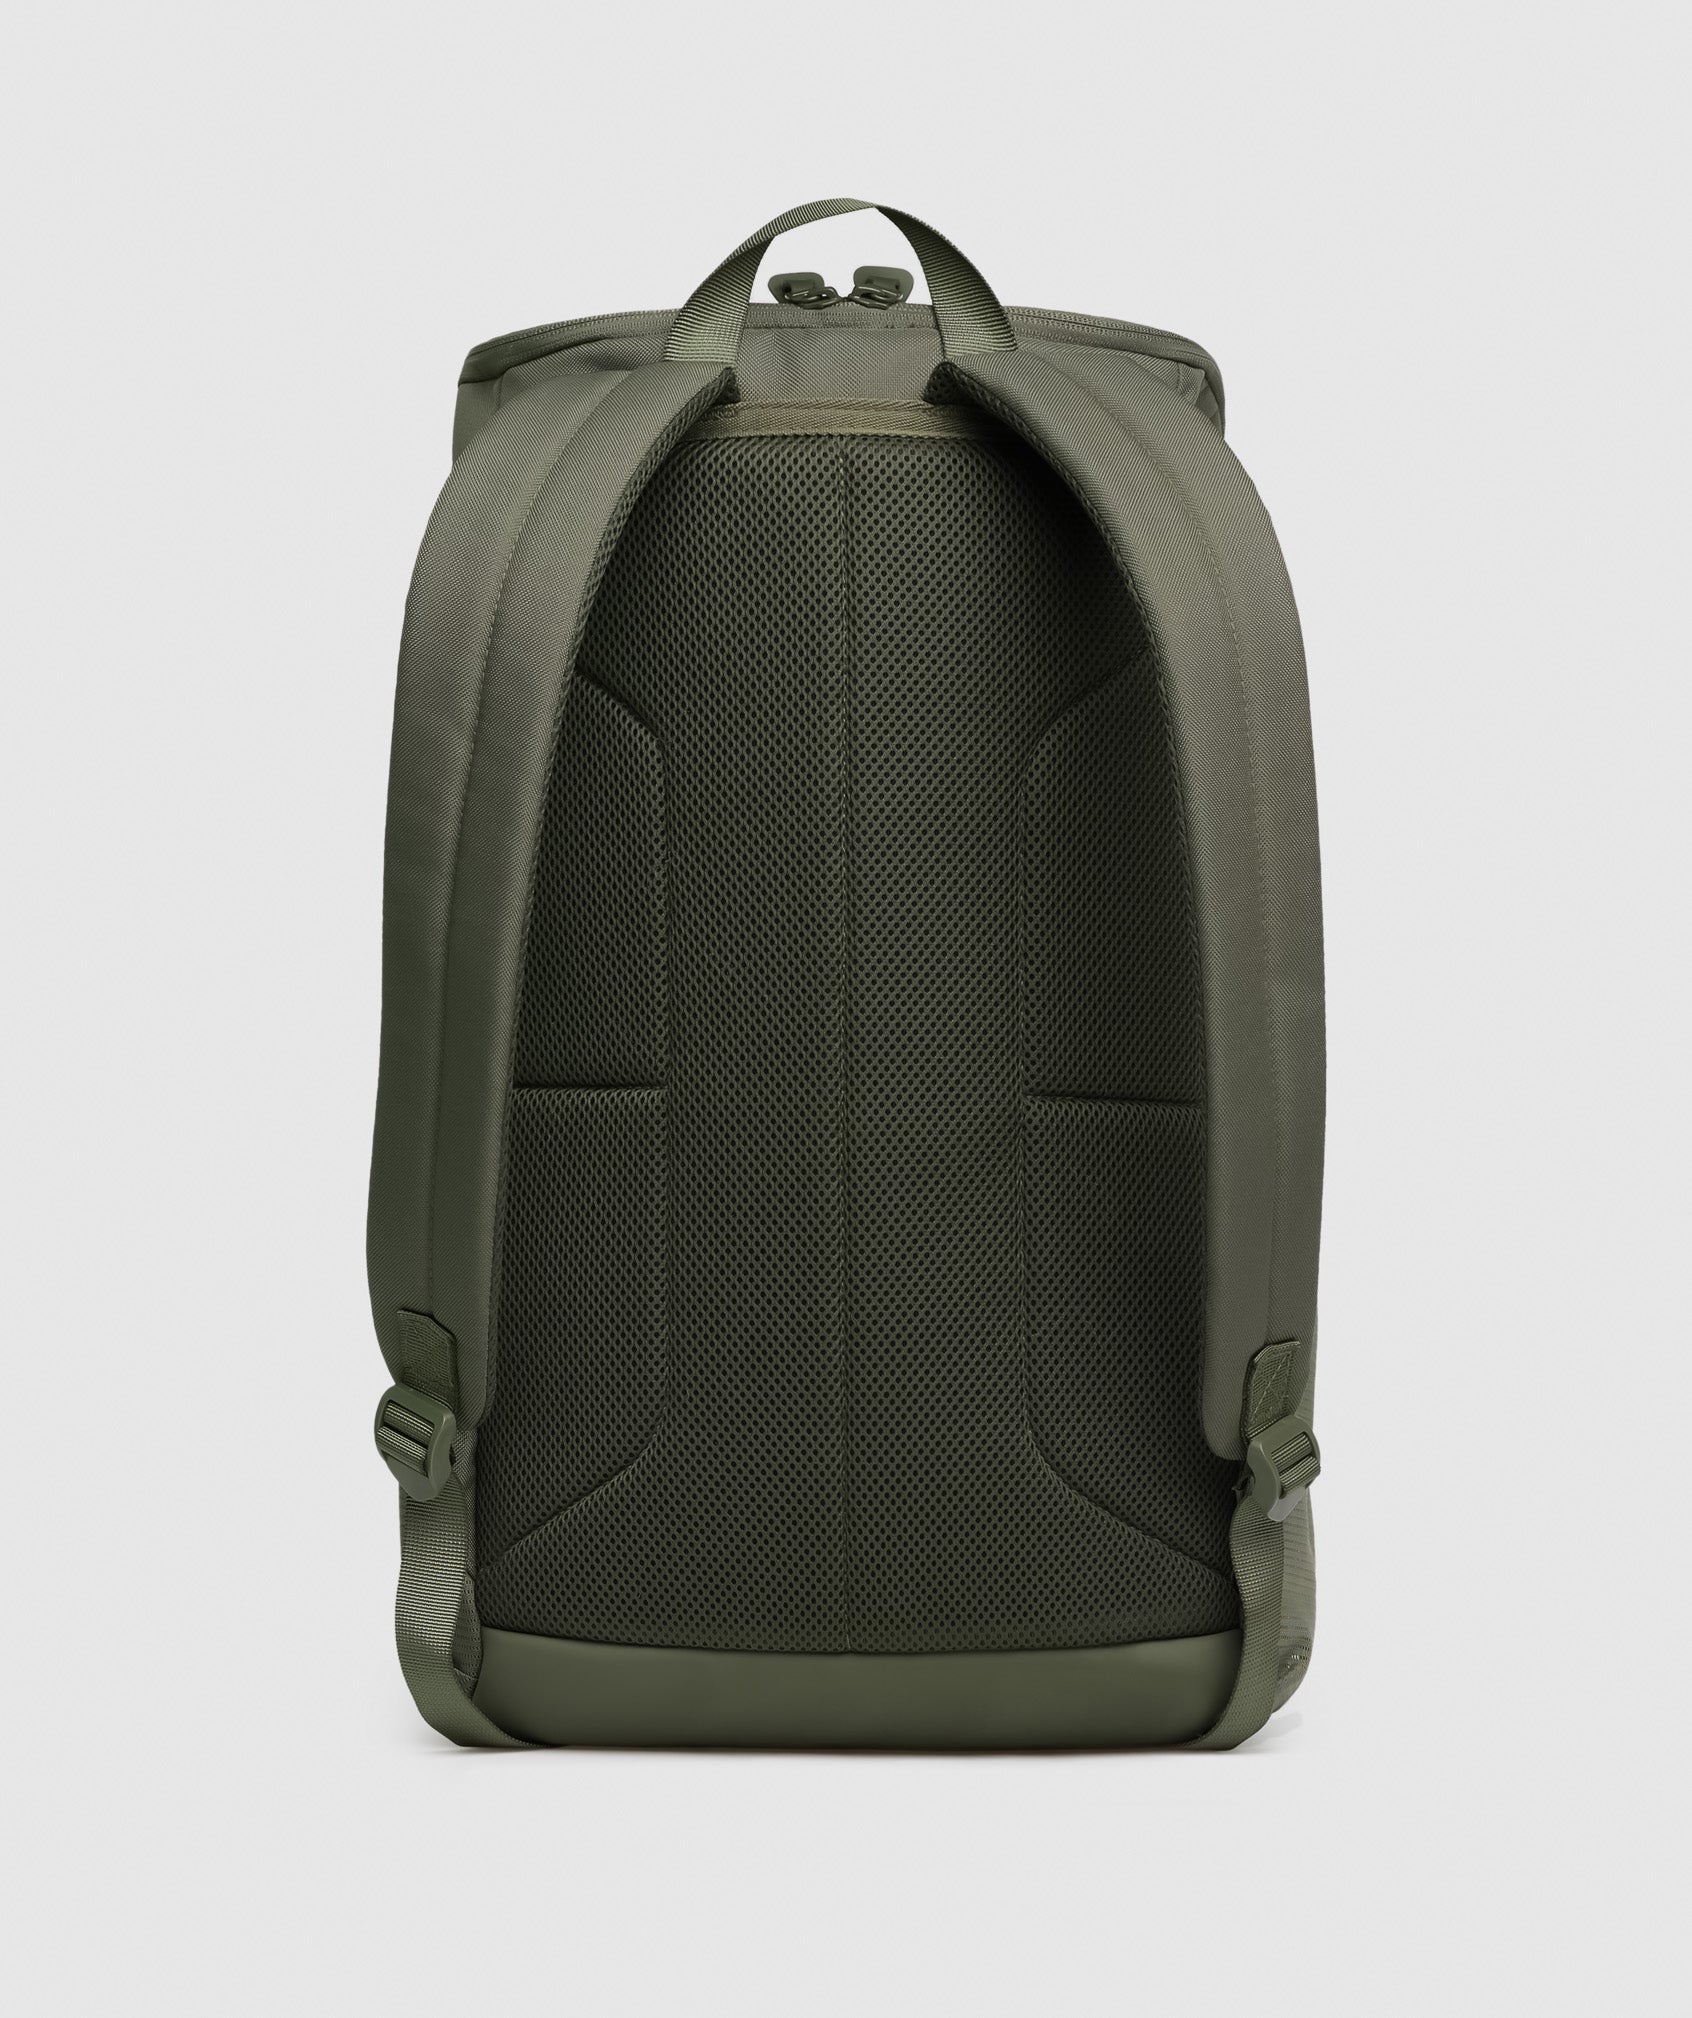 Sharkhead Backpack in Core Olive - view 2